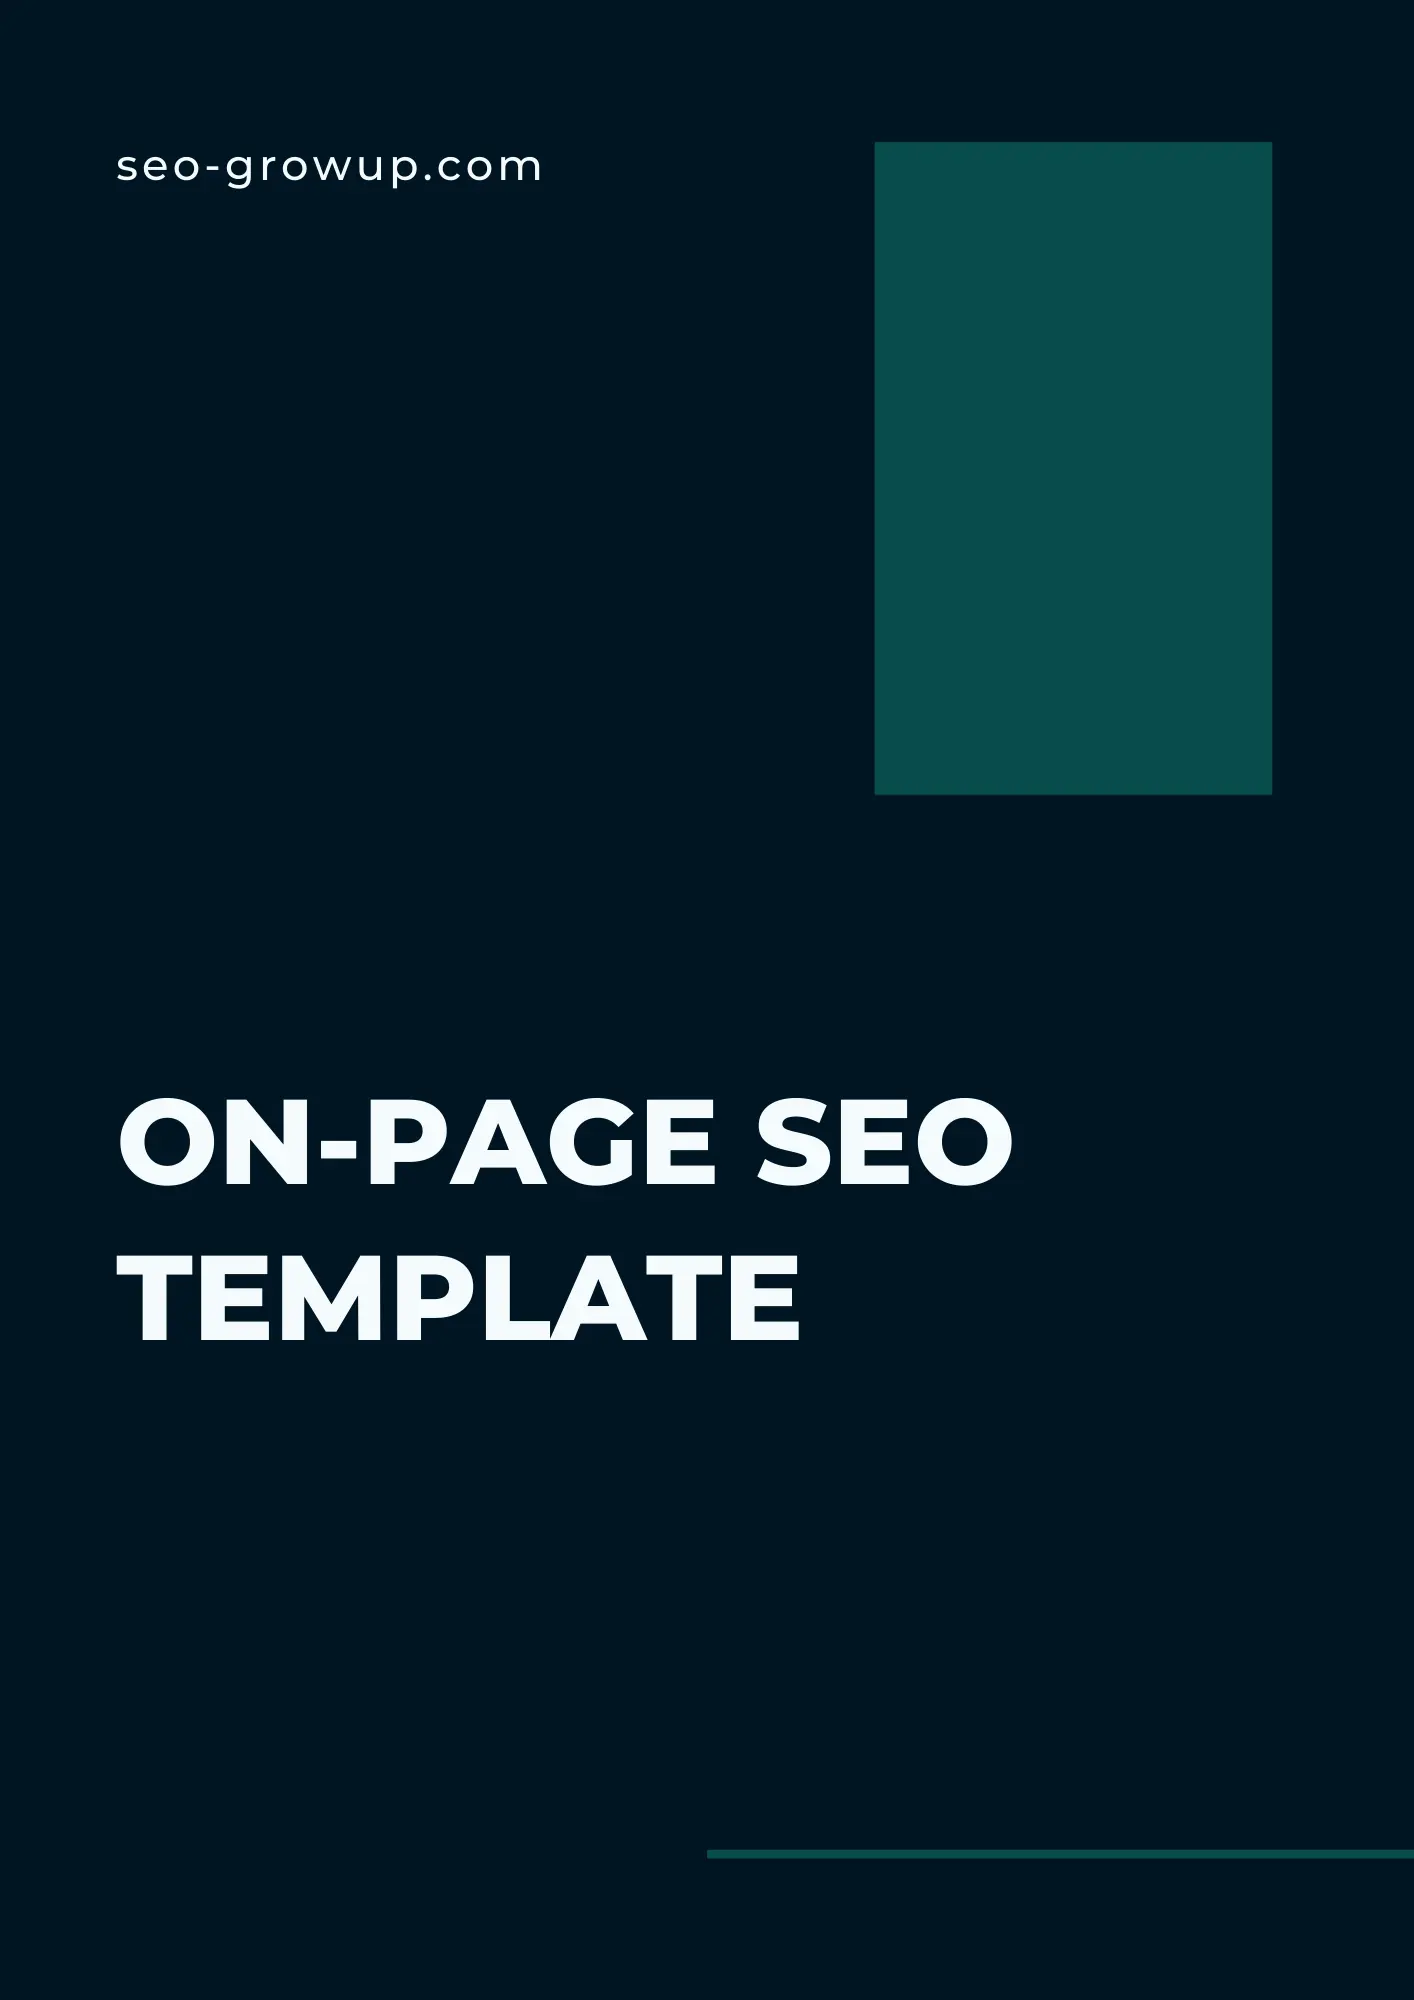 On-Page SEO Template